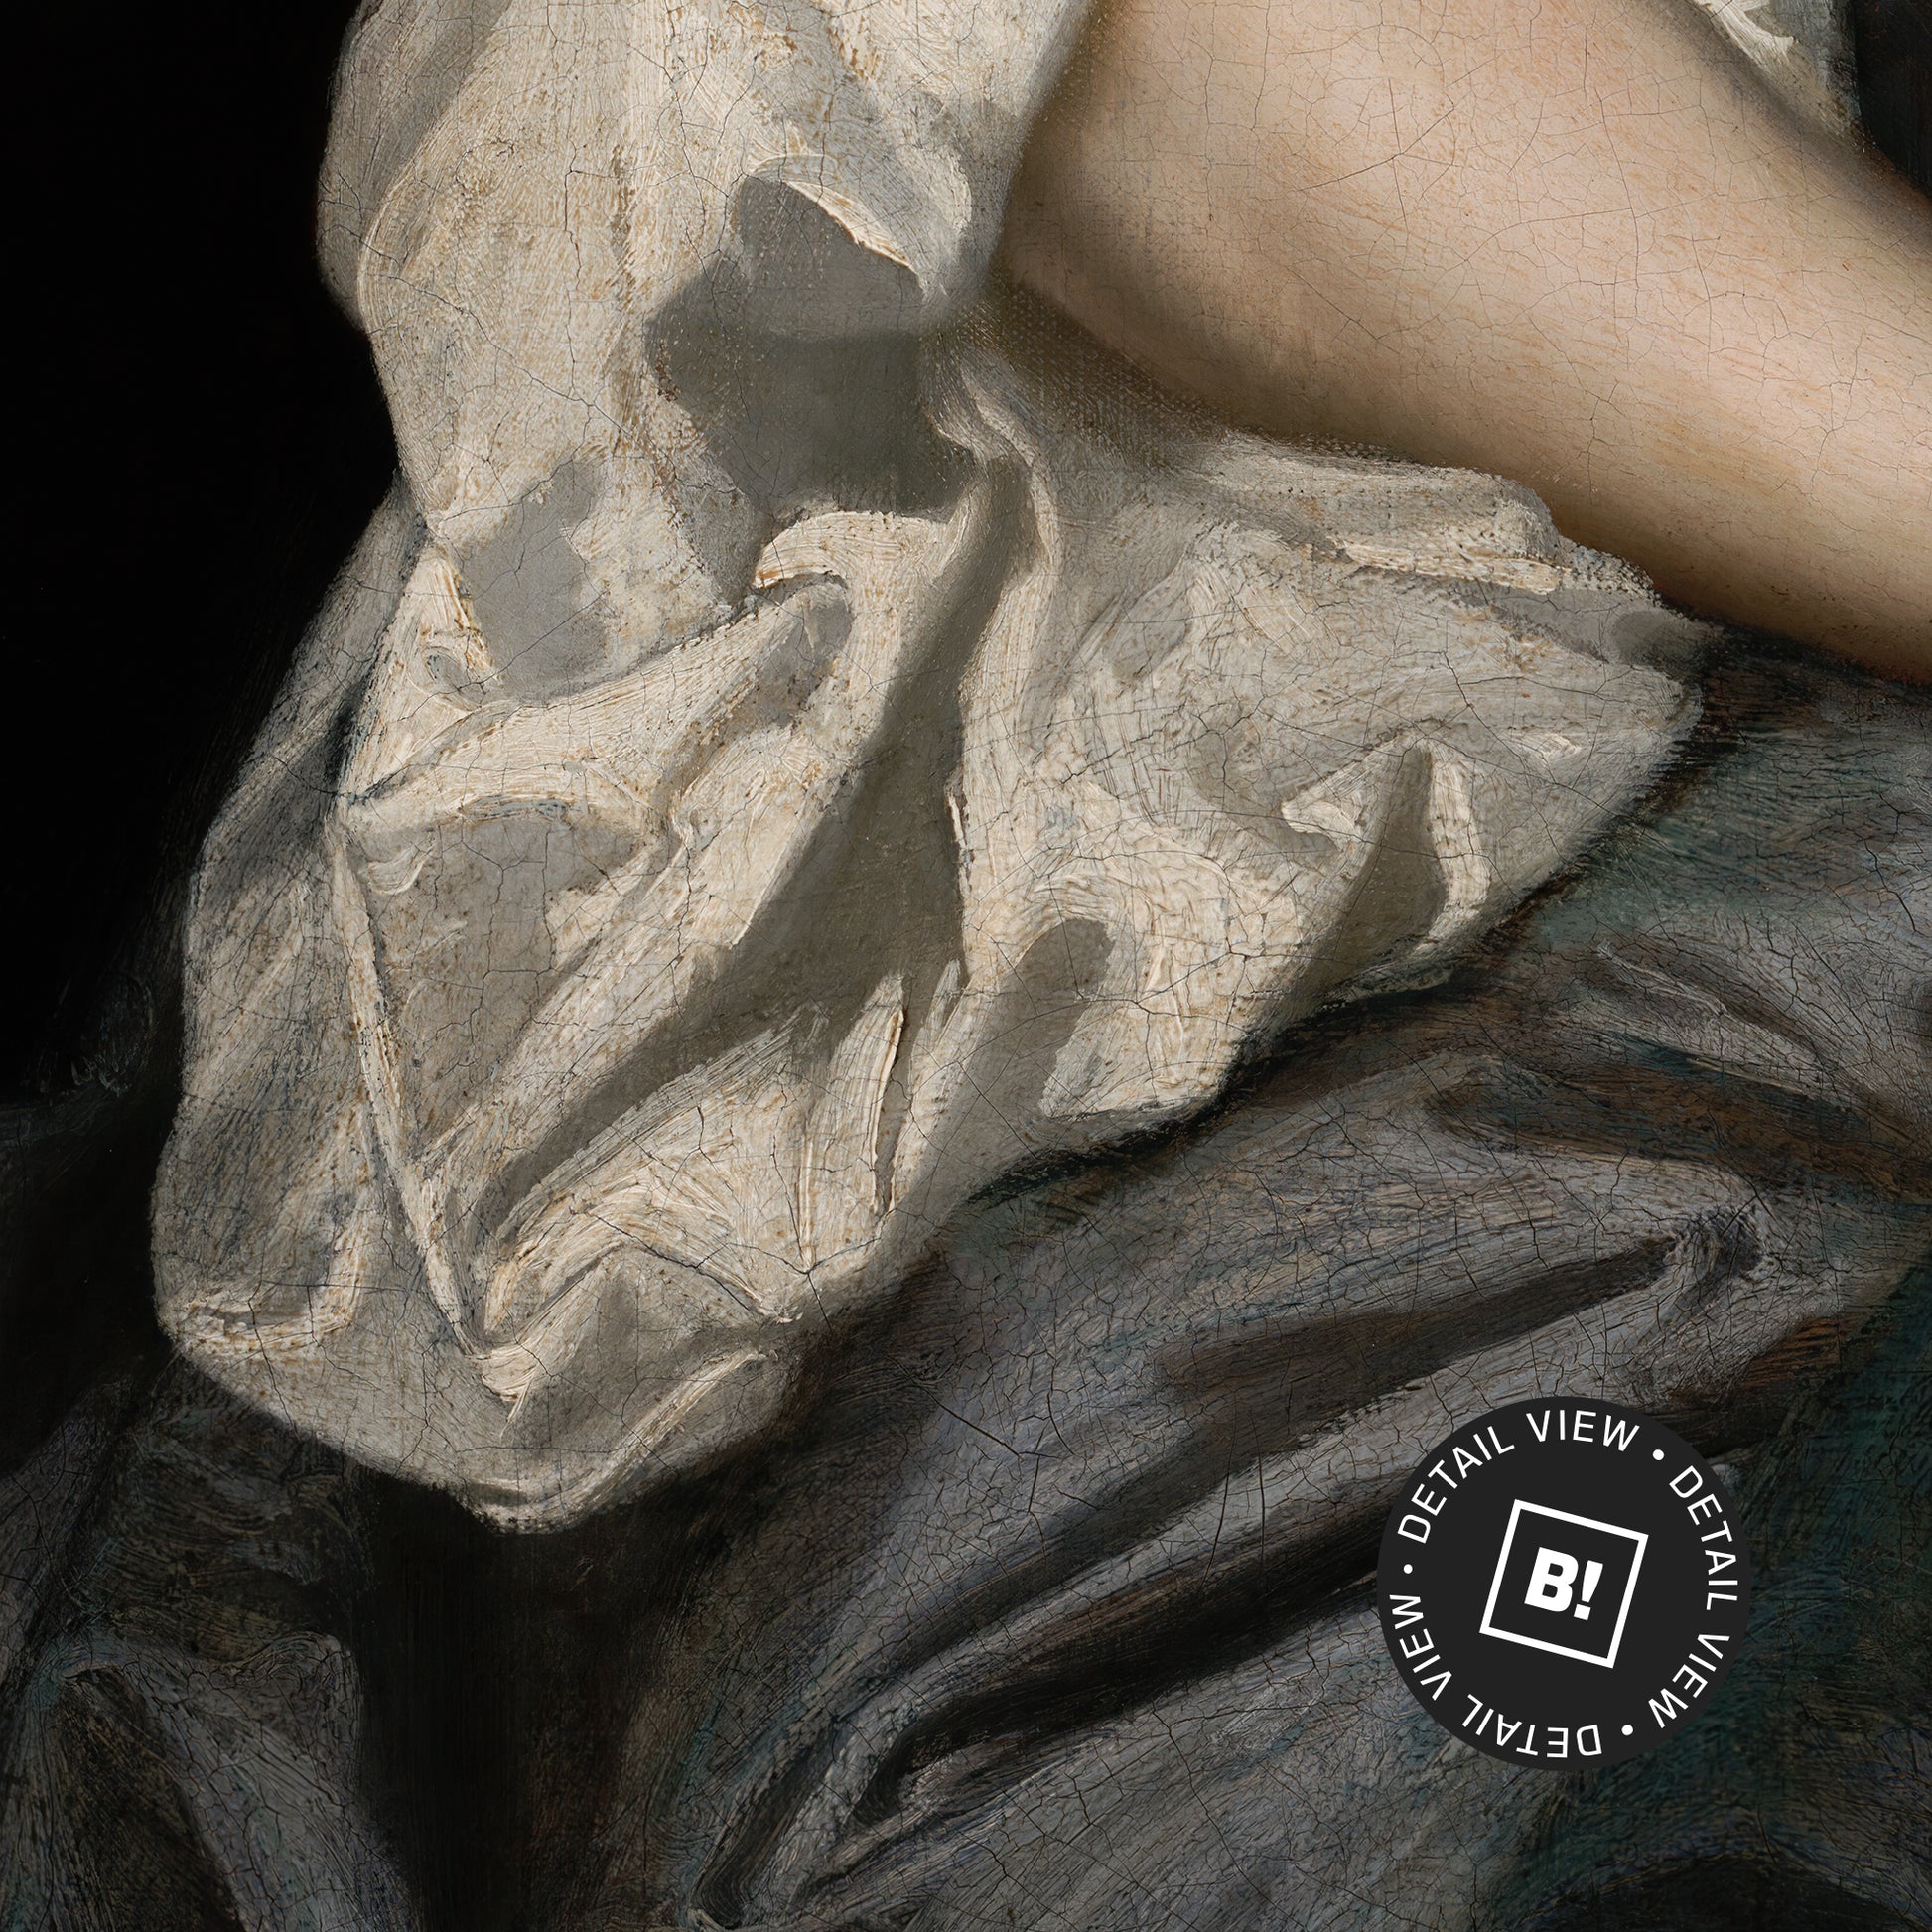 A detail view of Binspired's altered Victorian Woman in Gray Satin Dress art print. This artwork was printed using the giclée process on archival acid-free paper and shows its timeless beauty in every detail.